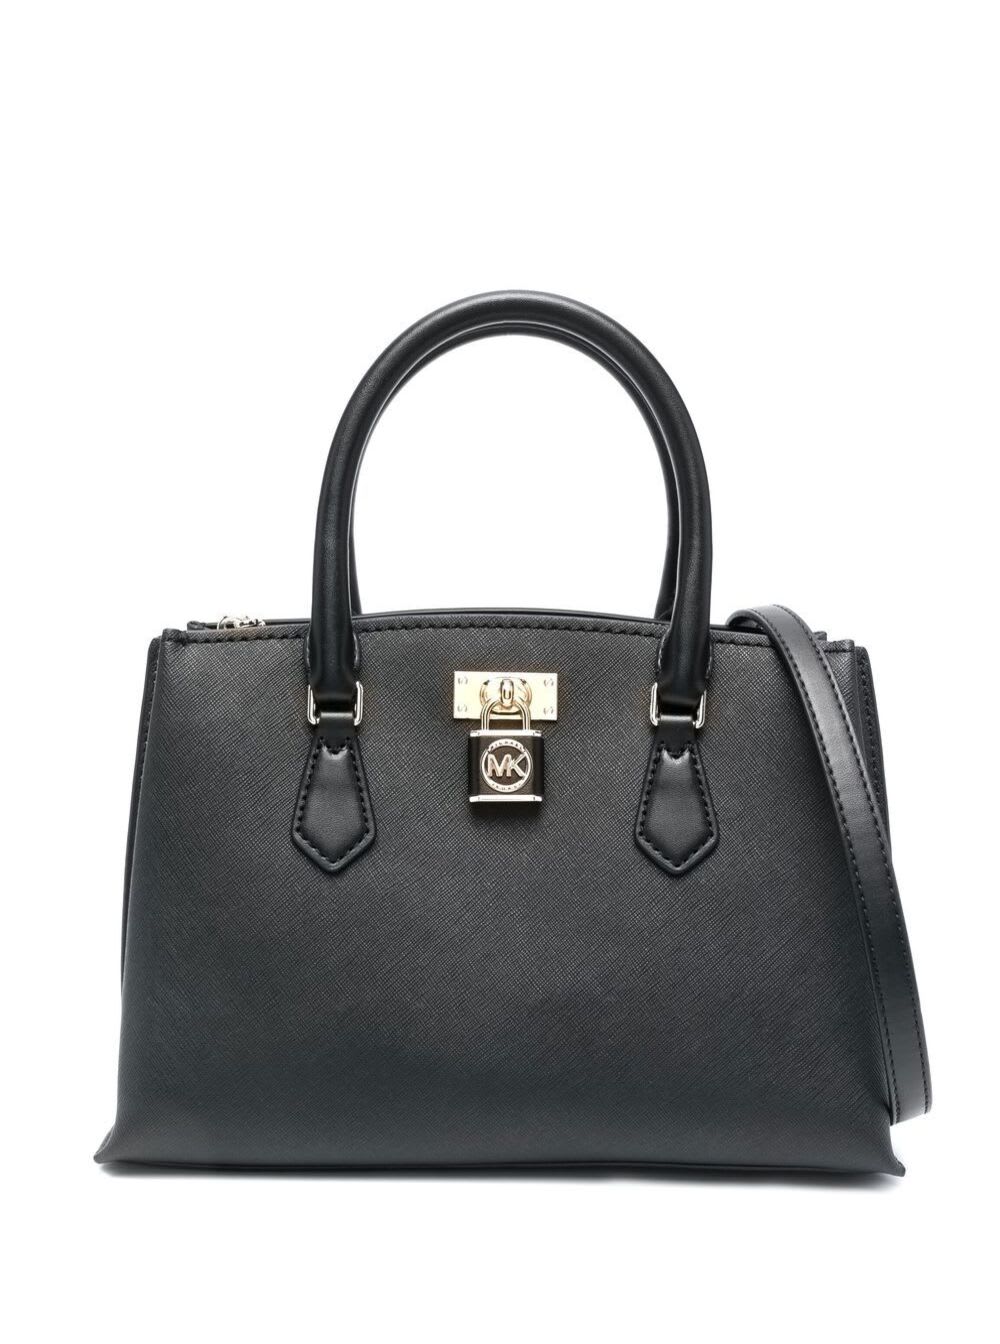 Michael Michael Kors Black Ruby Tote Bag With Lock Detailing In Leather Woman